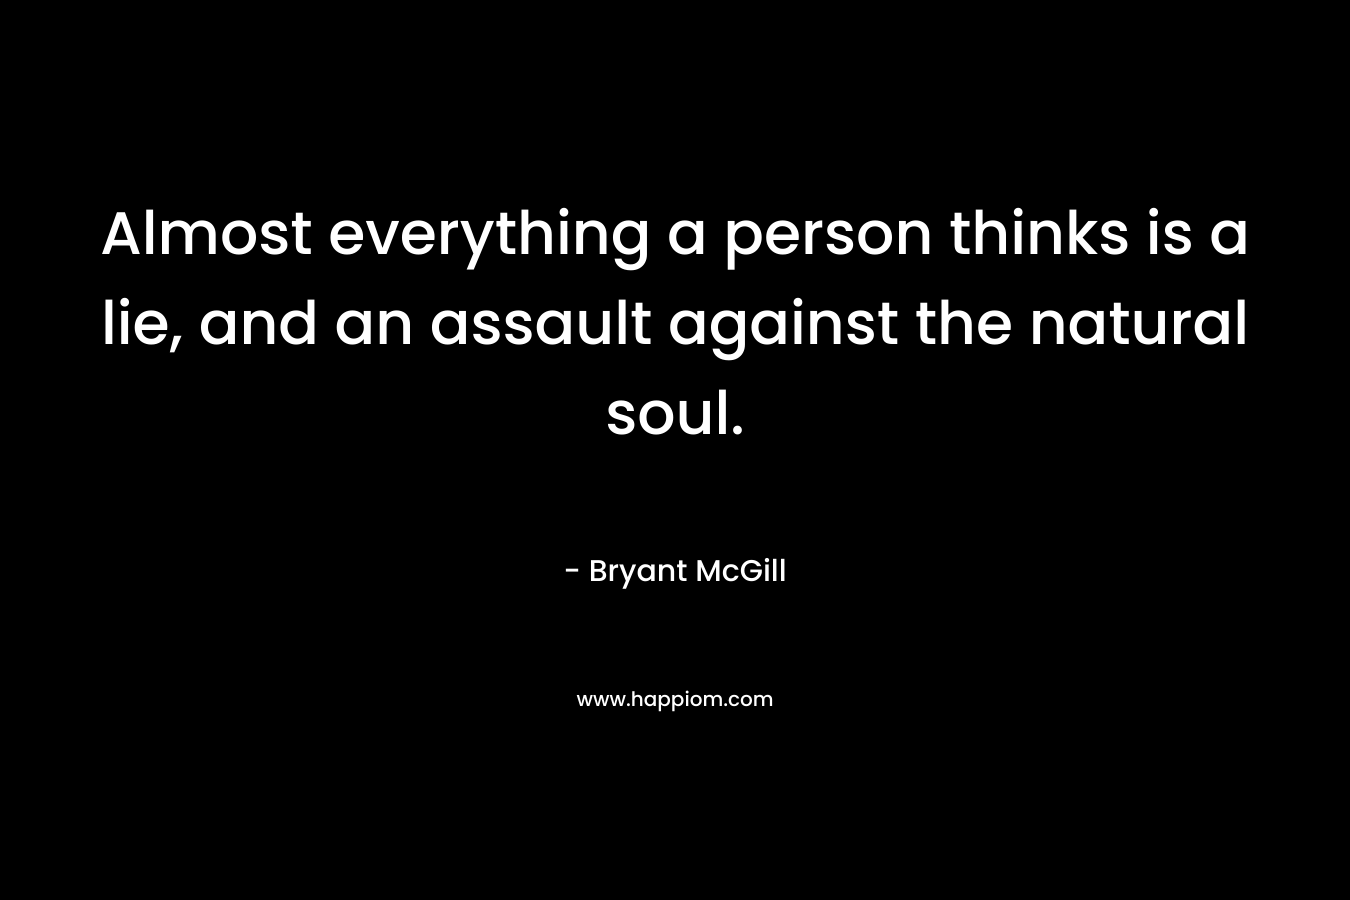 Almost everything a person thinks is a lie, and an assault against the natural soul.